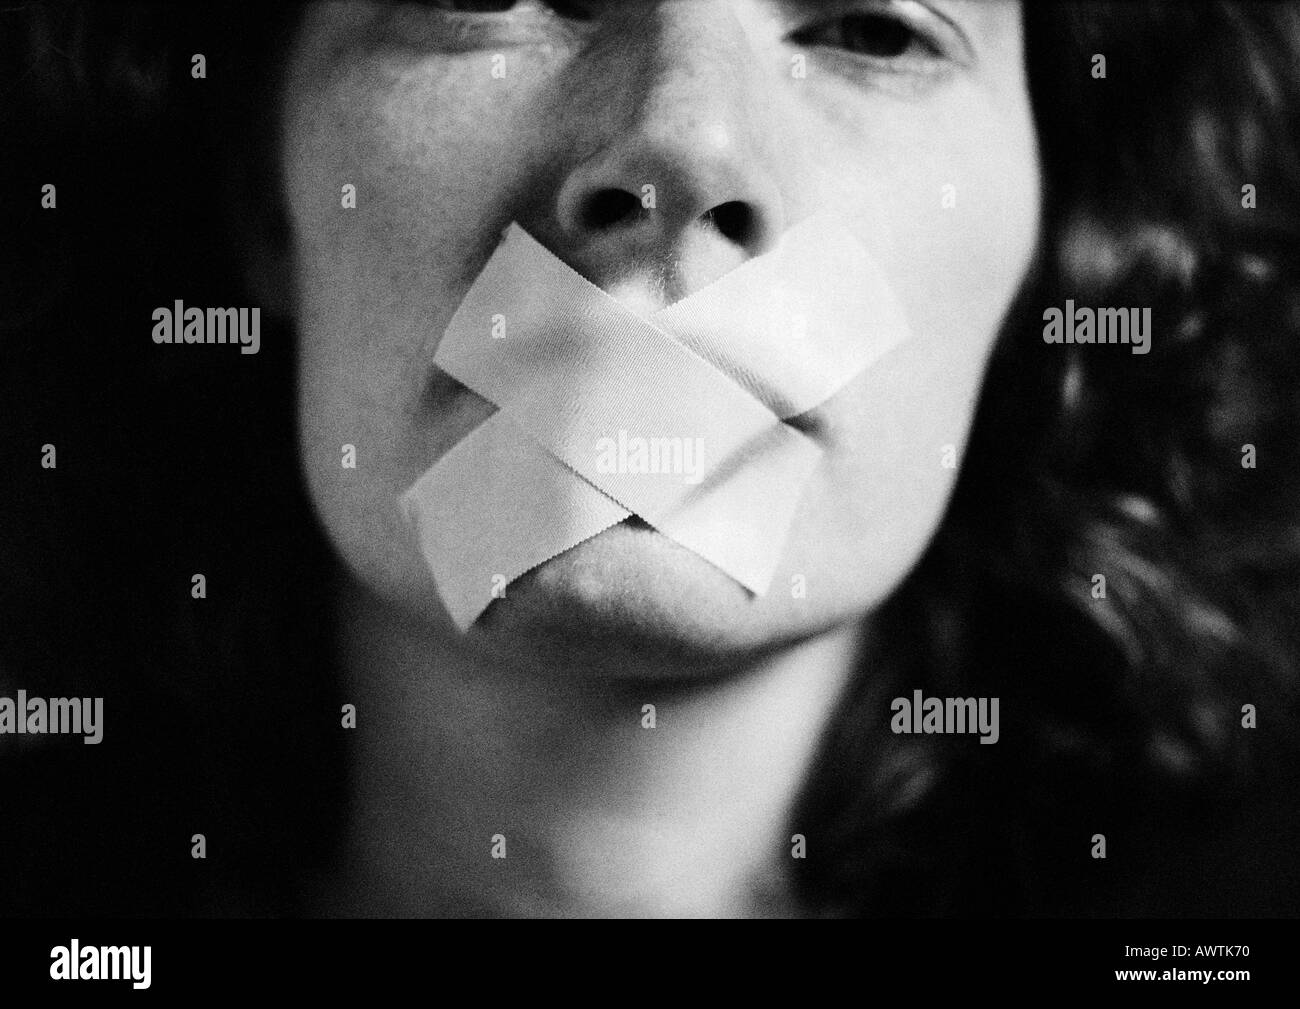 Woman with tape over mouth, close-up, blurred Stock Photo